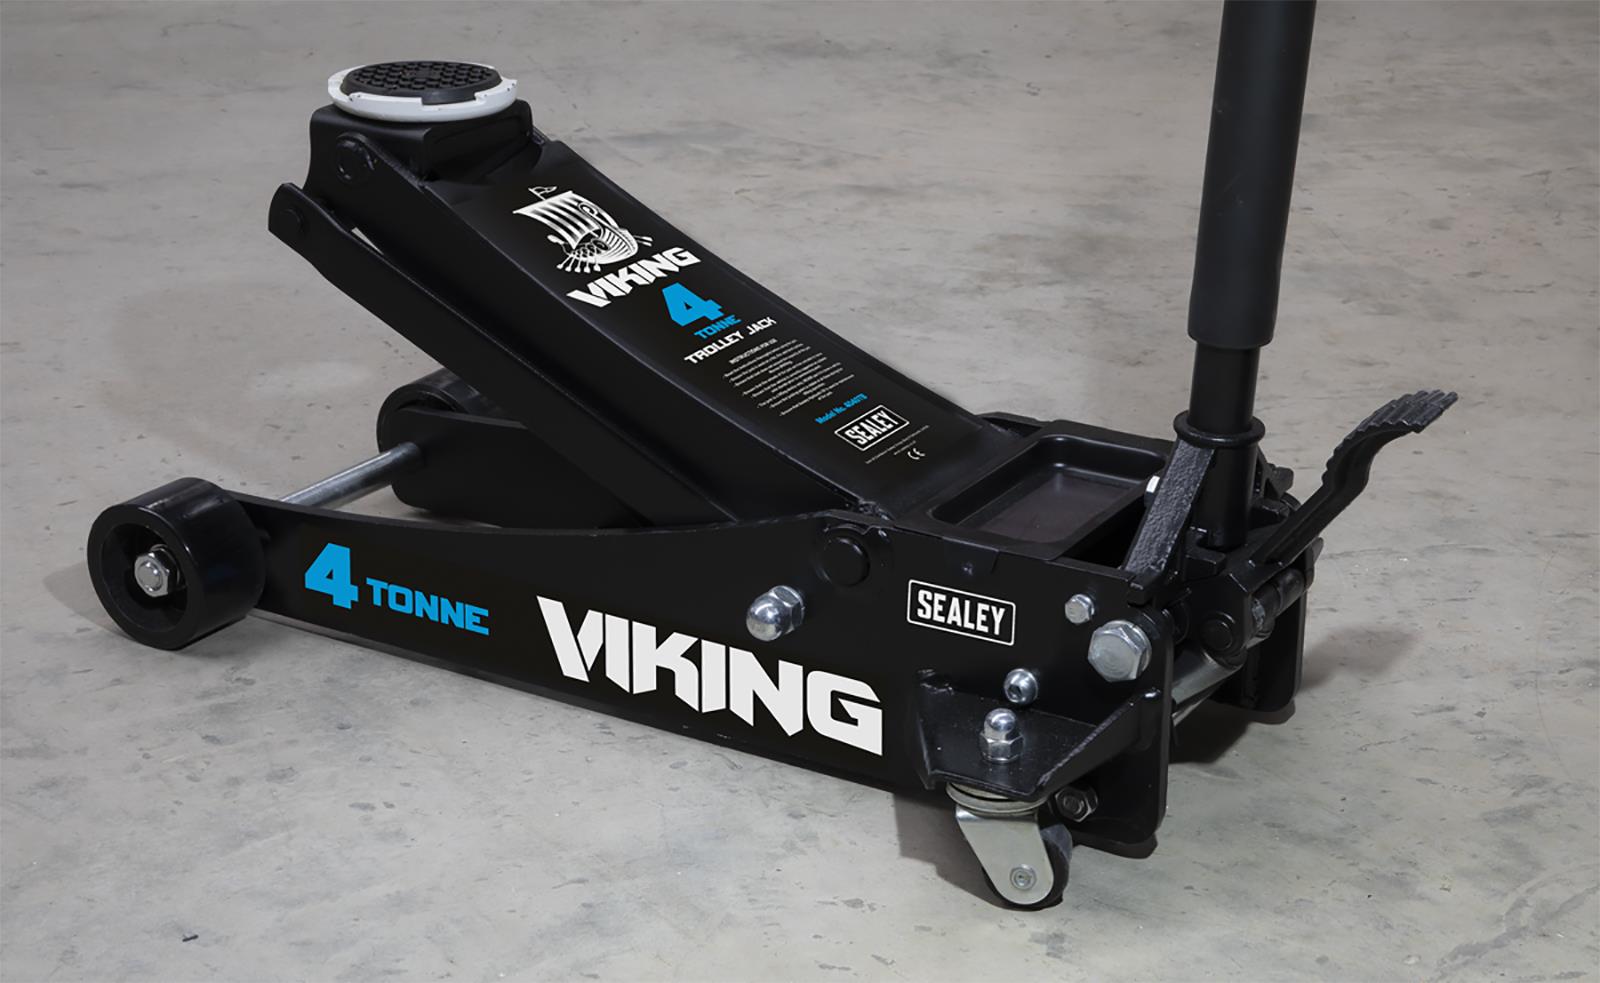 Sealey Viking 4 Tonne Tyre Bay Trolley Jack Low Entry with Rocket Lift